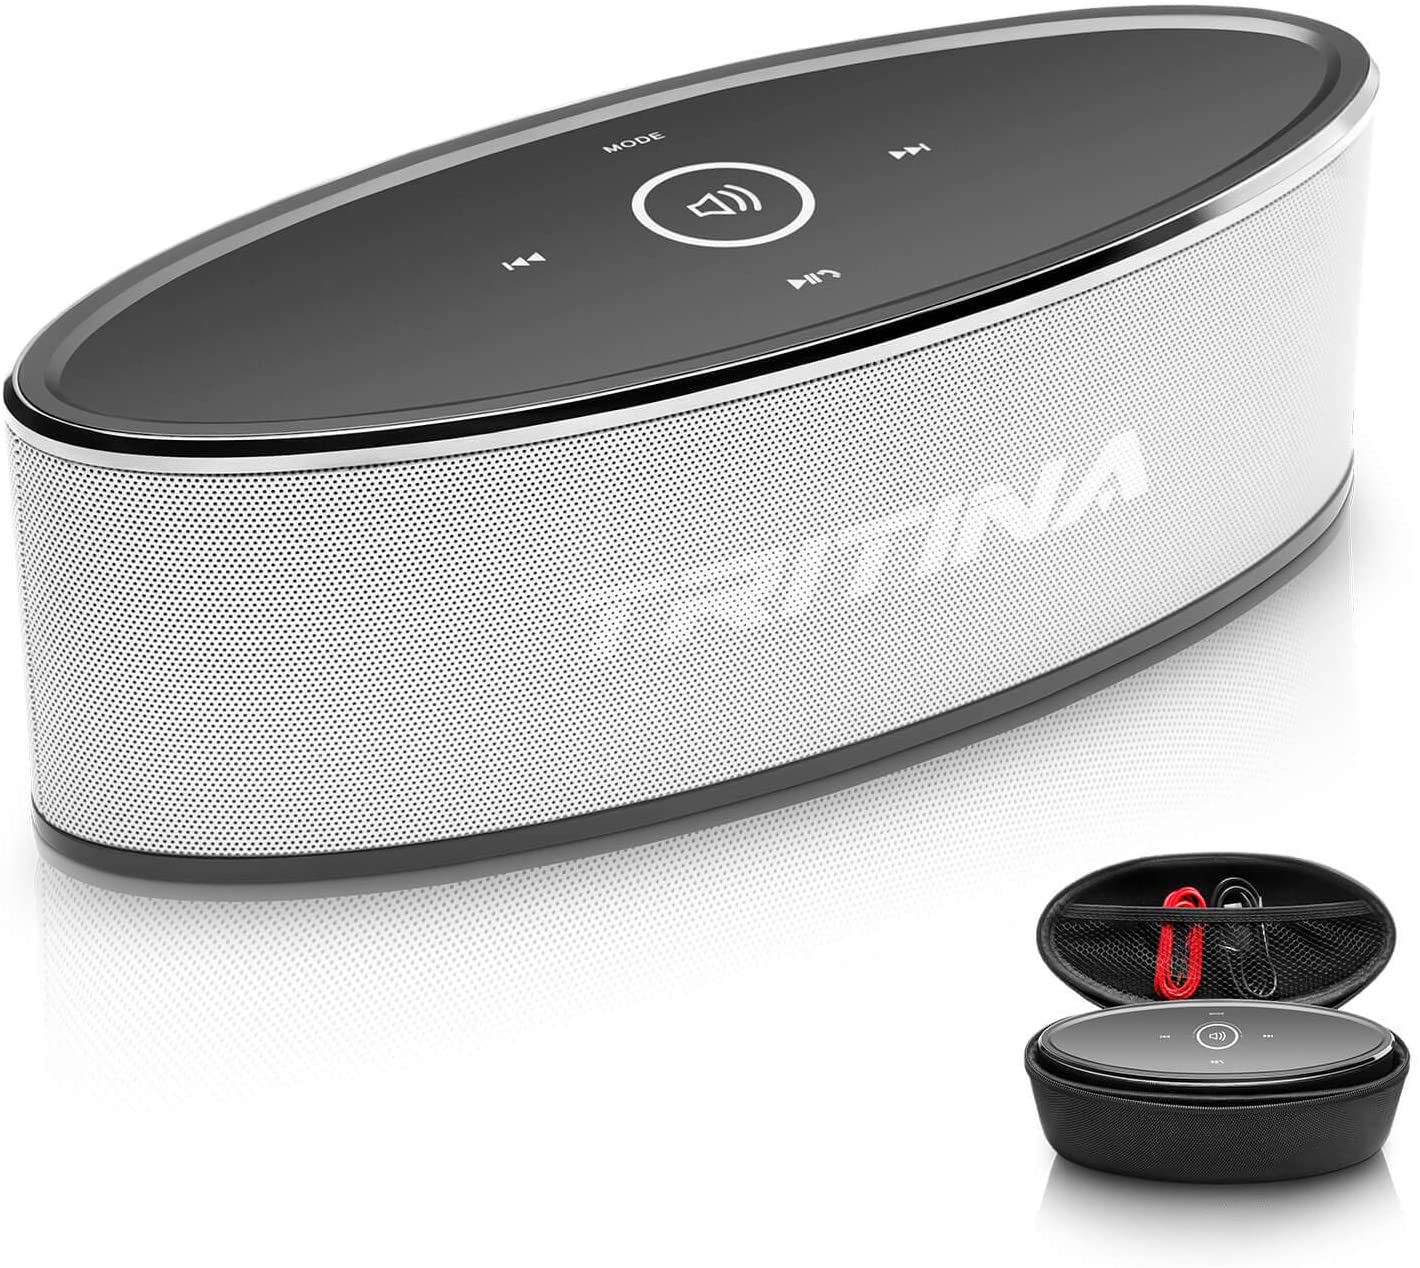 Tritina Wireless Speaker Stereo HD Sound, Touch Control with Fashion Light, Bluetooth Speaker Built-in Mic Handsfree Phone Calling, TF Card Slot & AUX